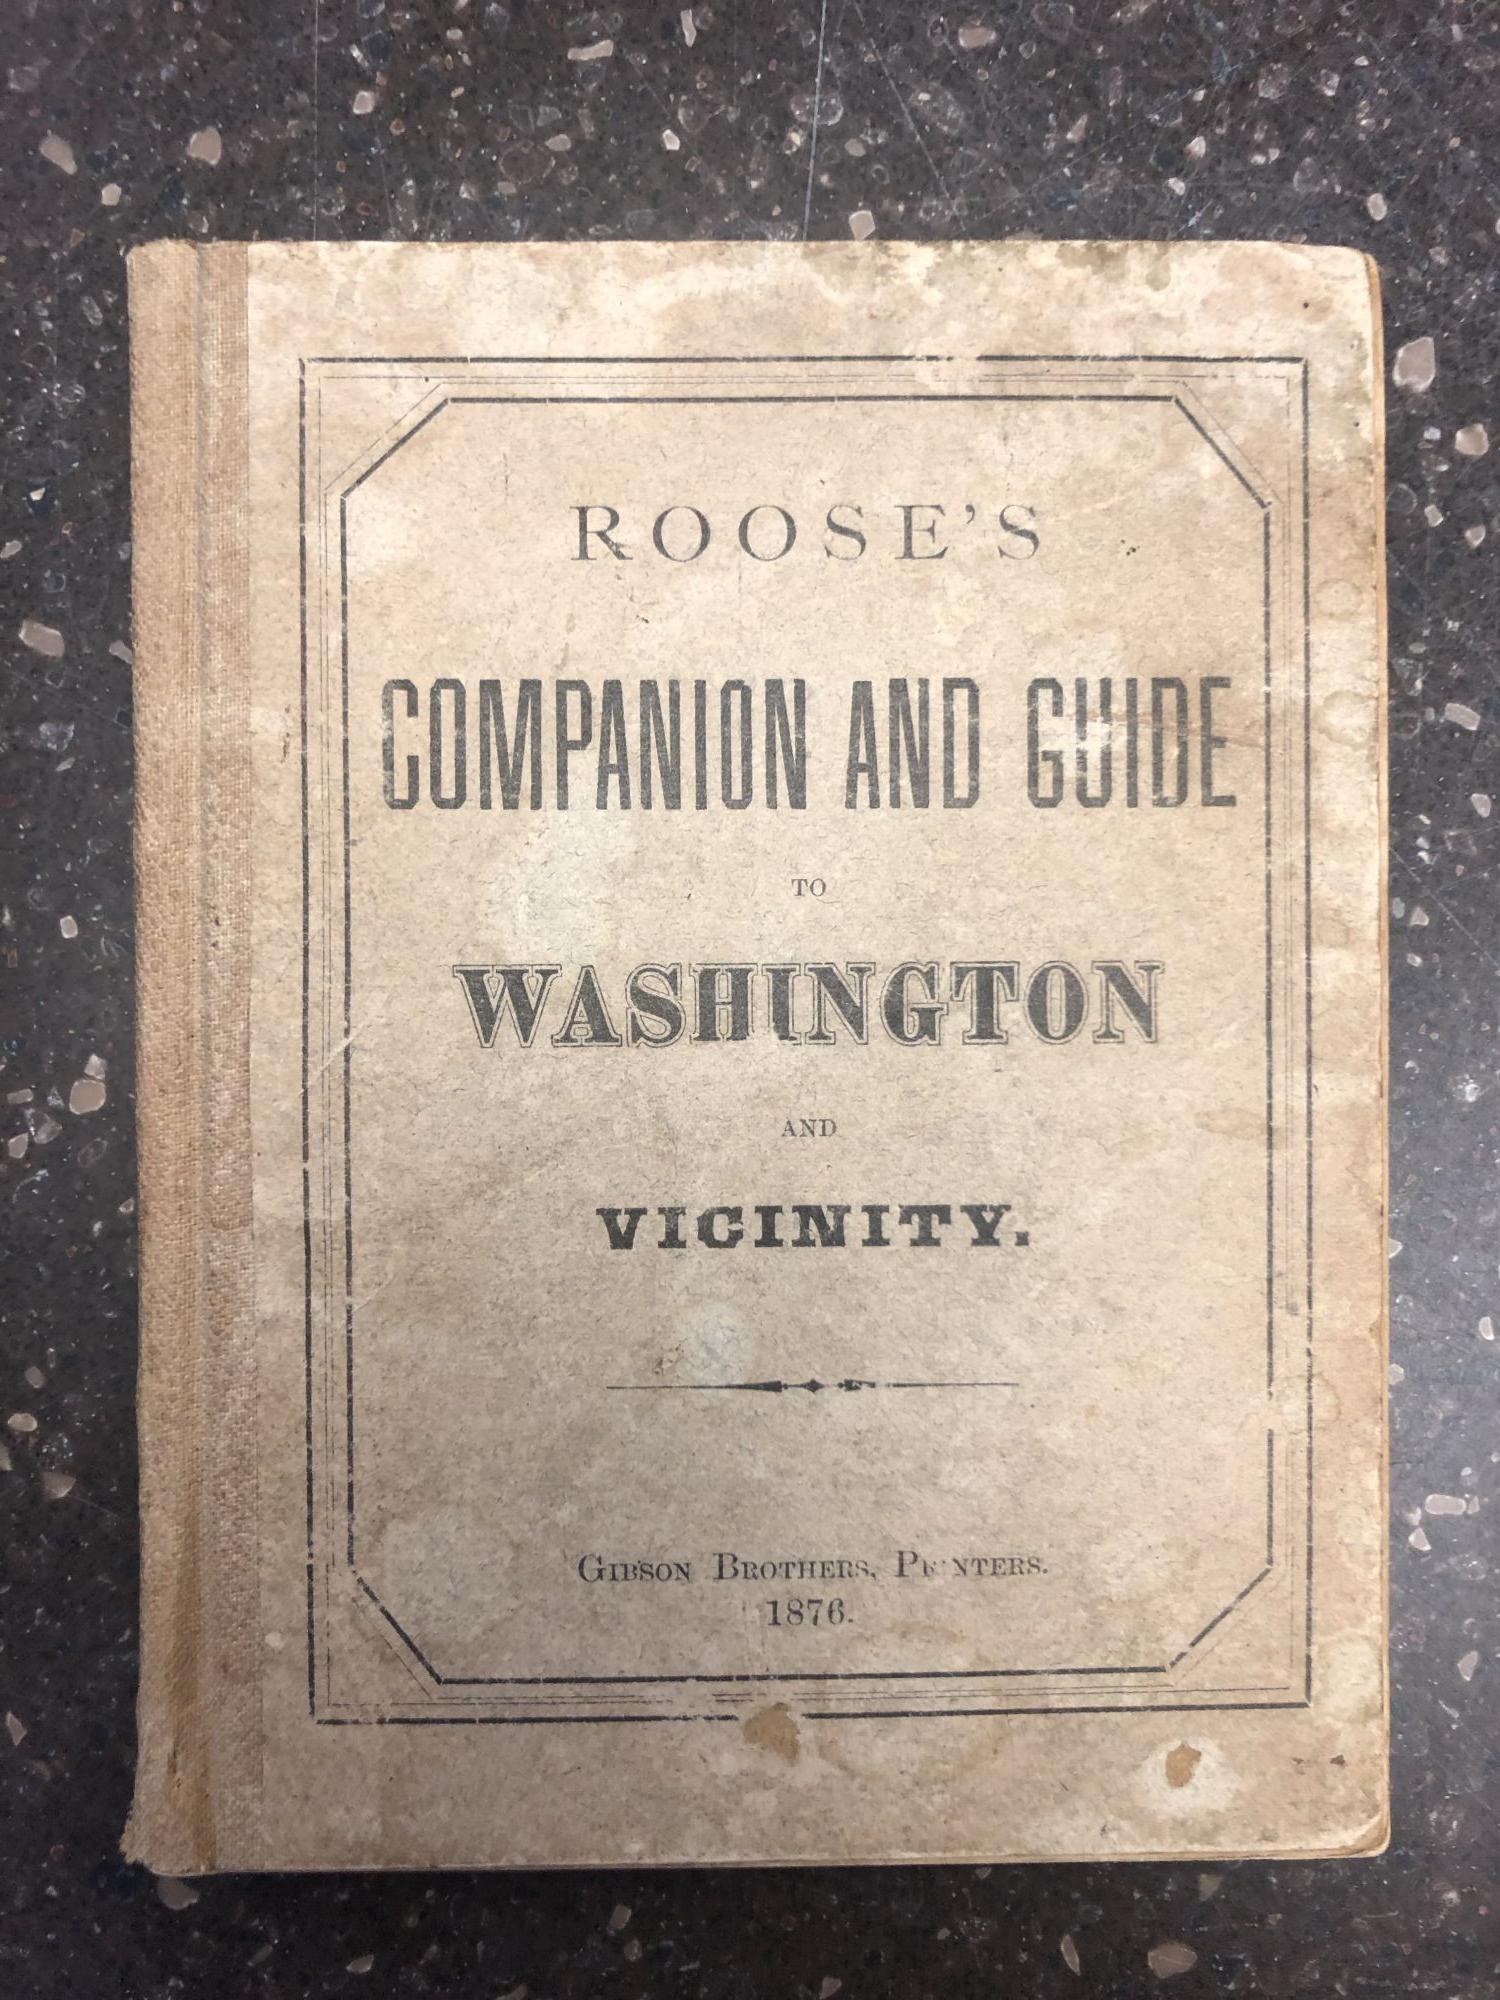 1318314 ROOSE'S COMPANION AND GUIDE TO WASHINGTON AND VICINITY. W. S. Roose.